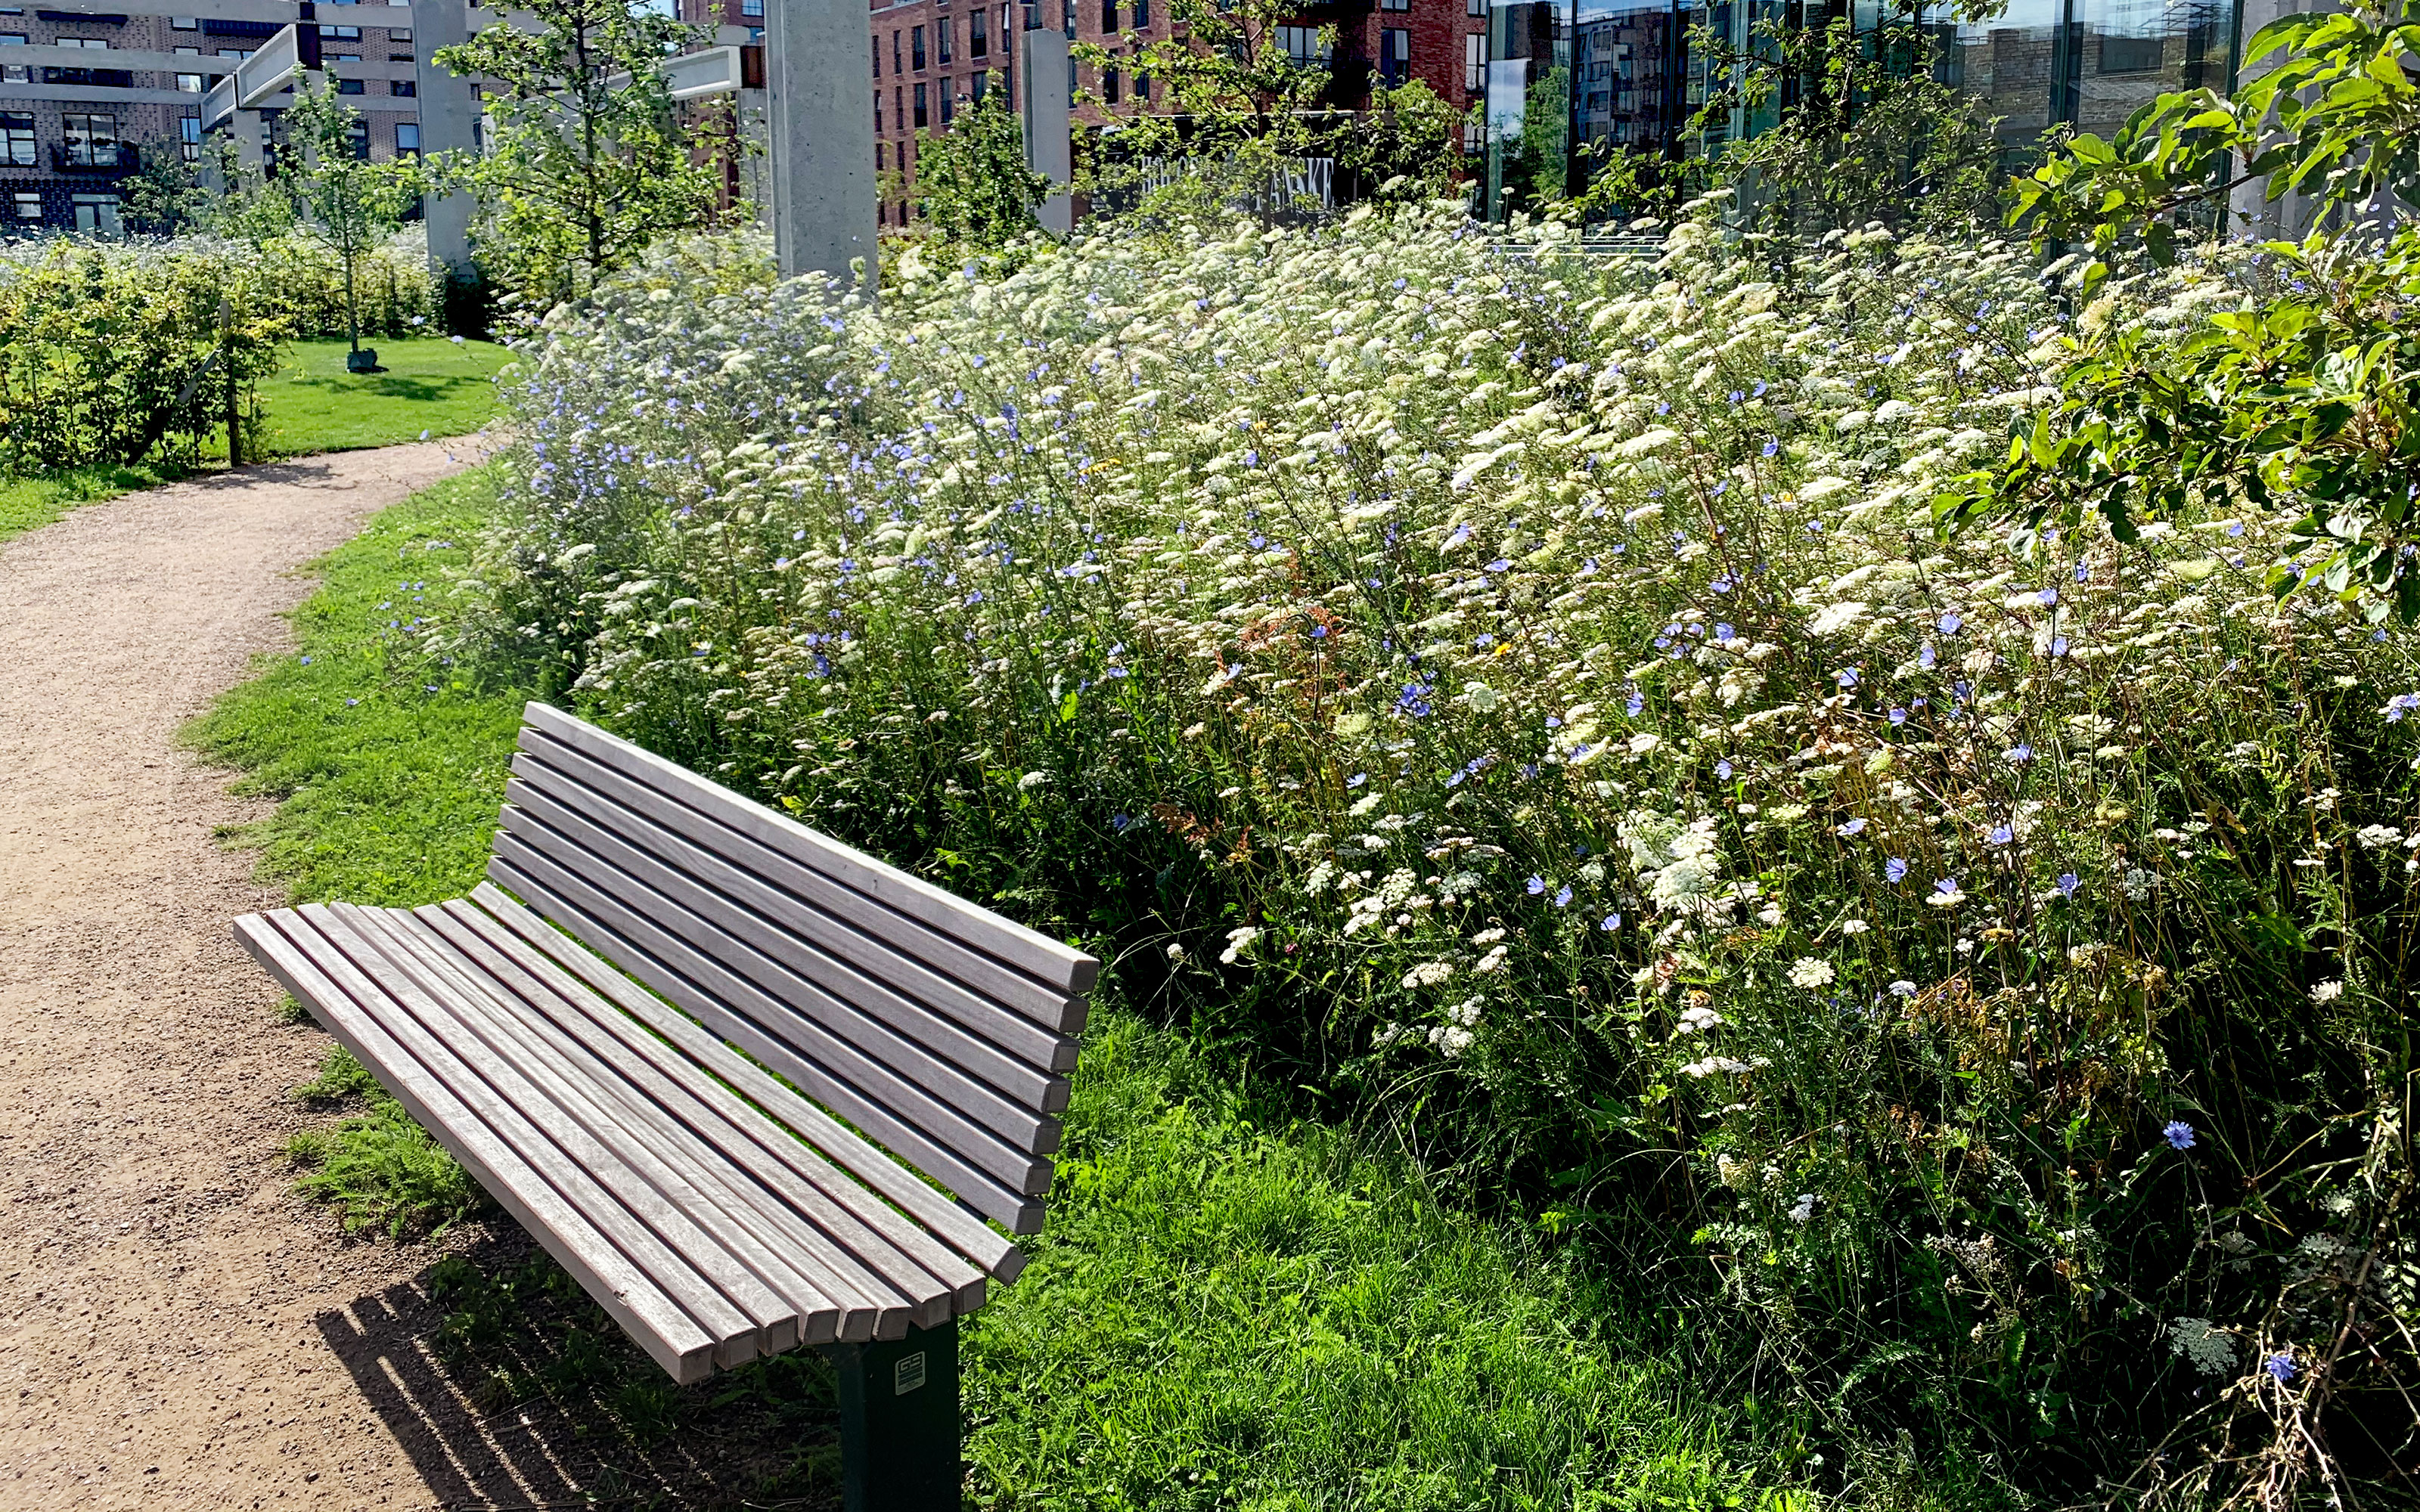 A bench in front of a meadow